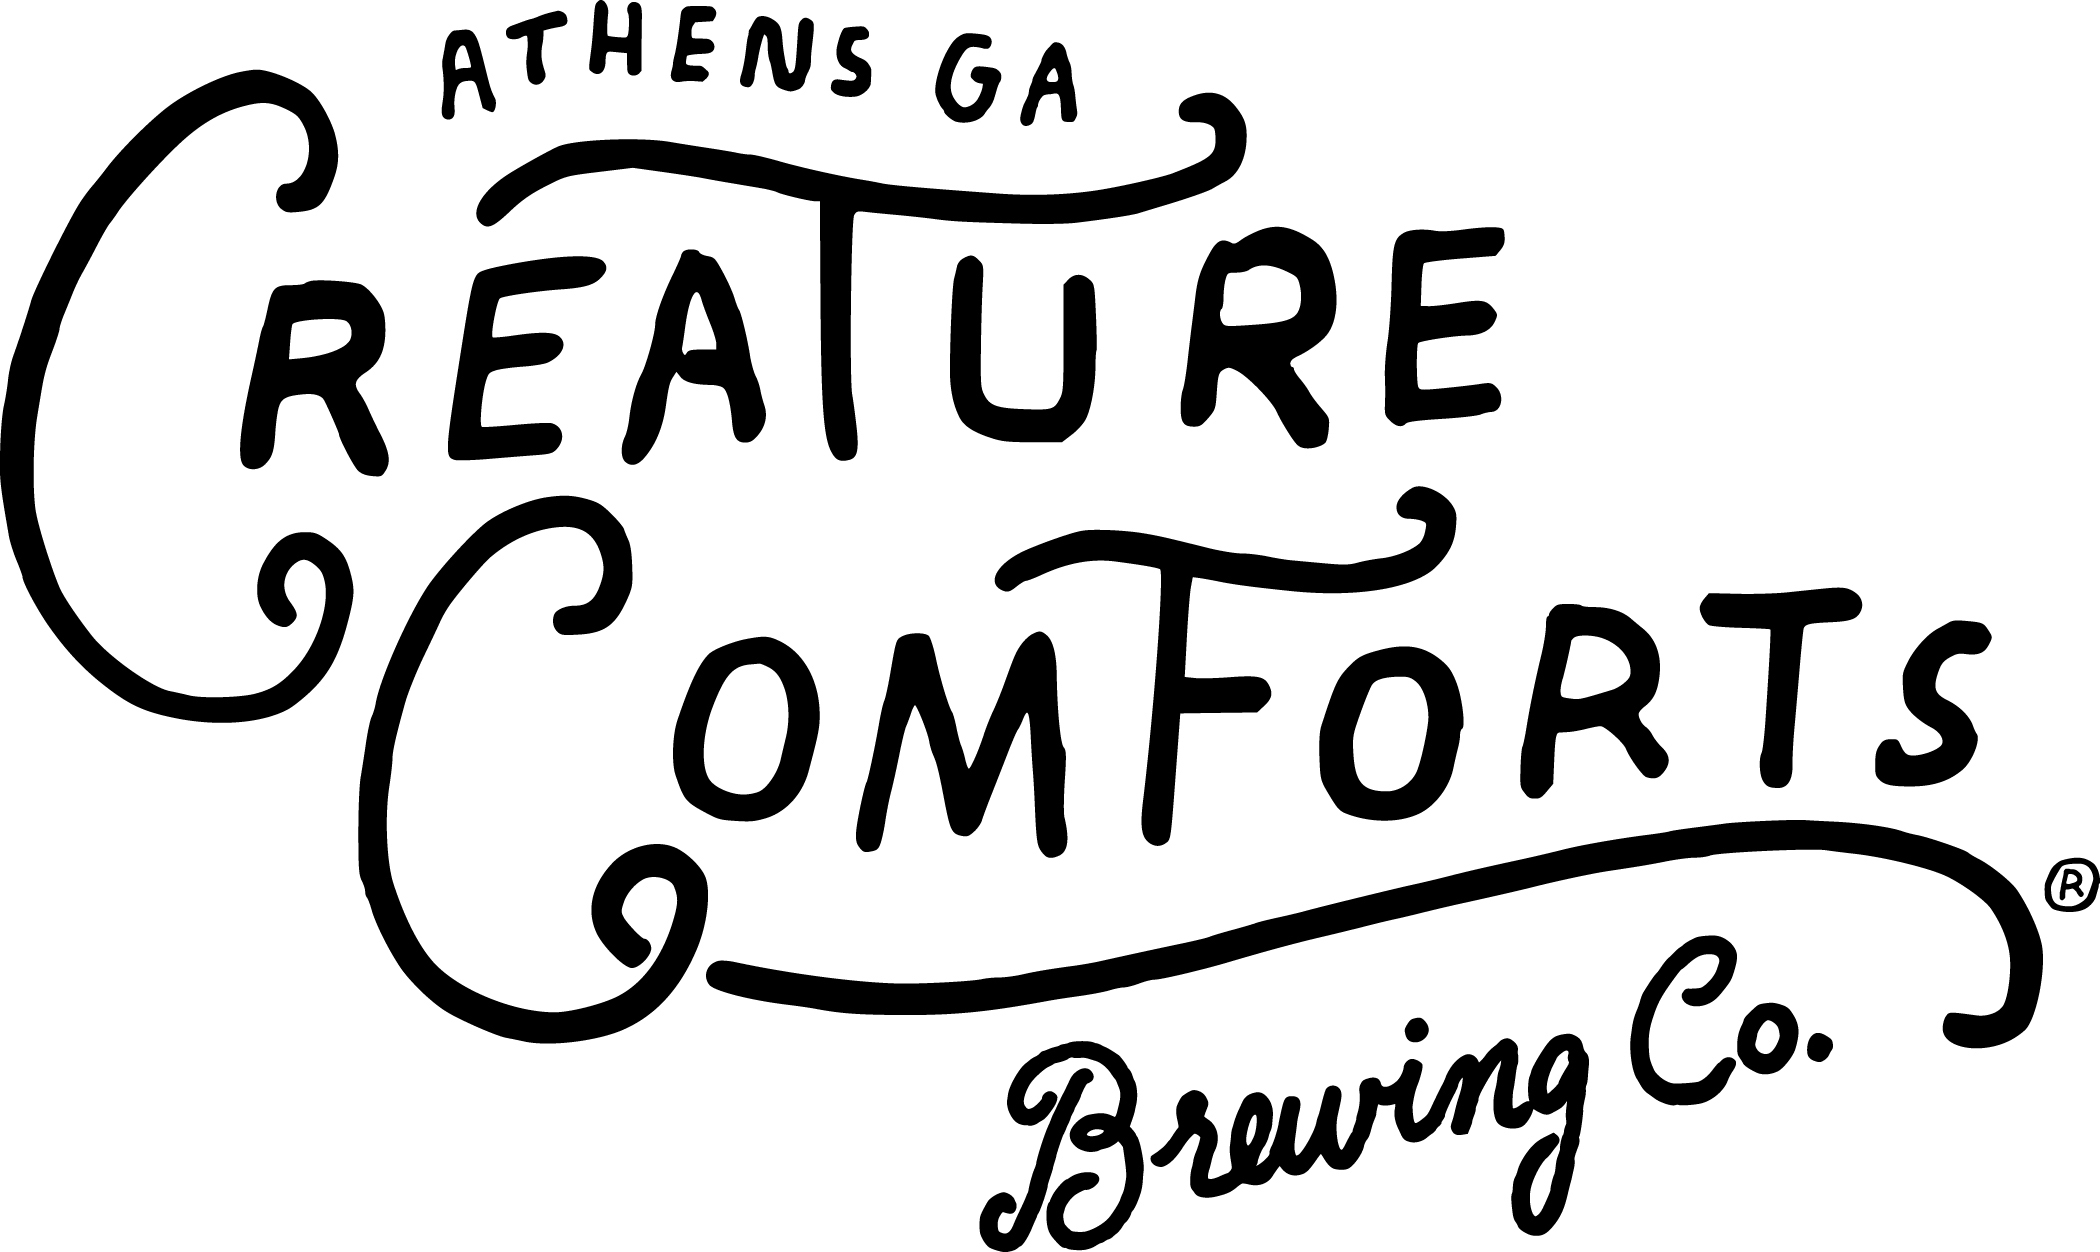 Creature Comforts Brewing Co.